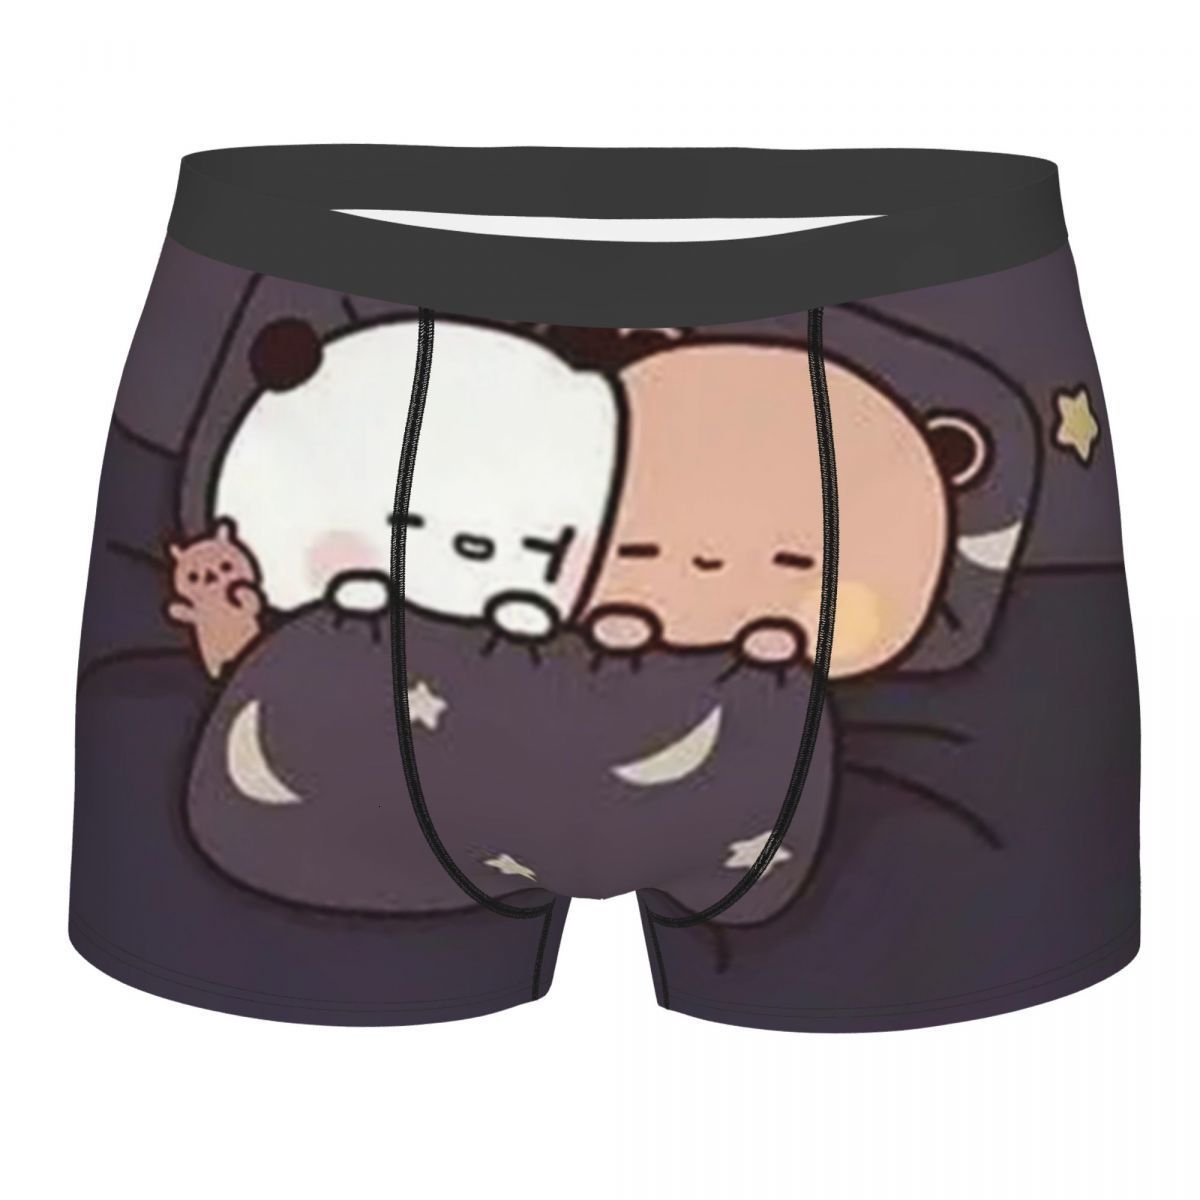 

Underpants Cub Sleeping Man' Boxer Briefs Bubu Dudu Cartoon Highly Breathable Underwear High Quality Print Shorts Birthday Gifts 230602, As the picture